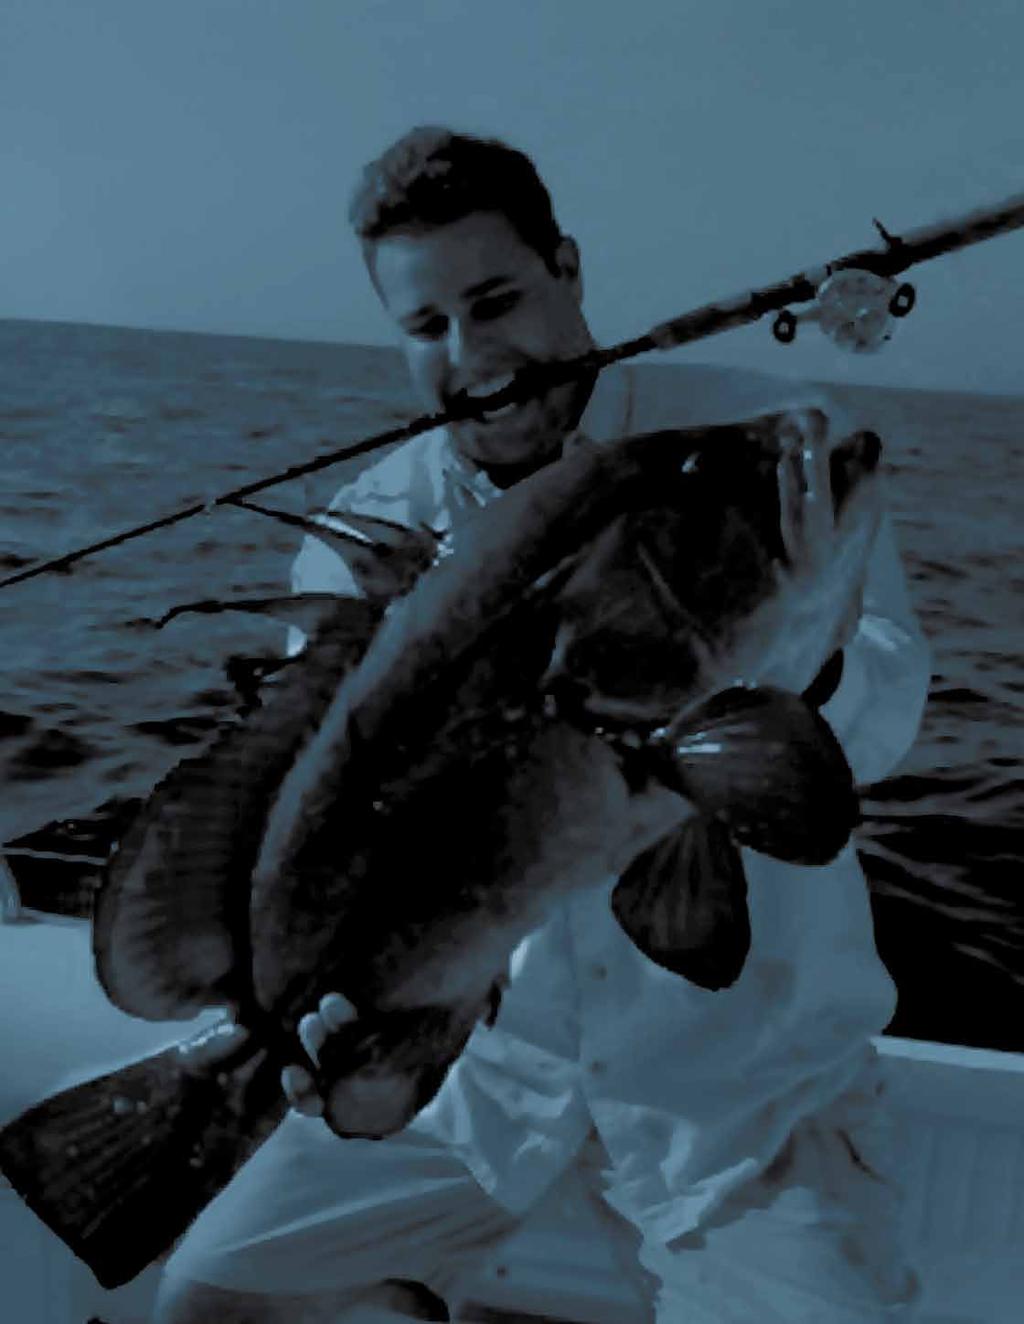 saltwater pro-blue series - pelagic series - Halibut rod surf series - greenwater series popping - live bait - shallow water rods Big, Hot, Fish. What s not to like about fishing the salt?